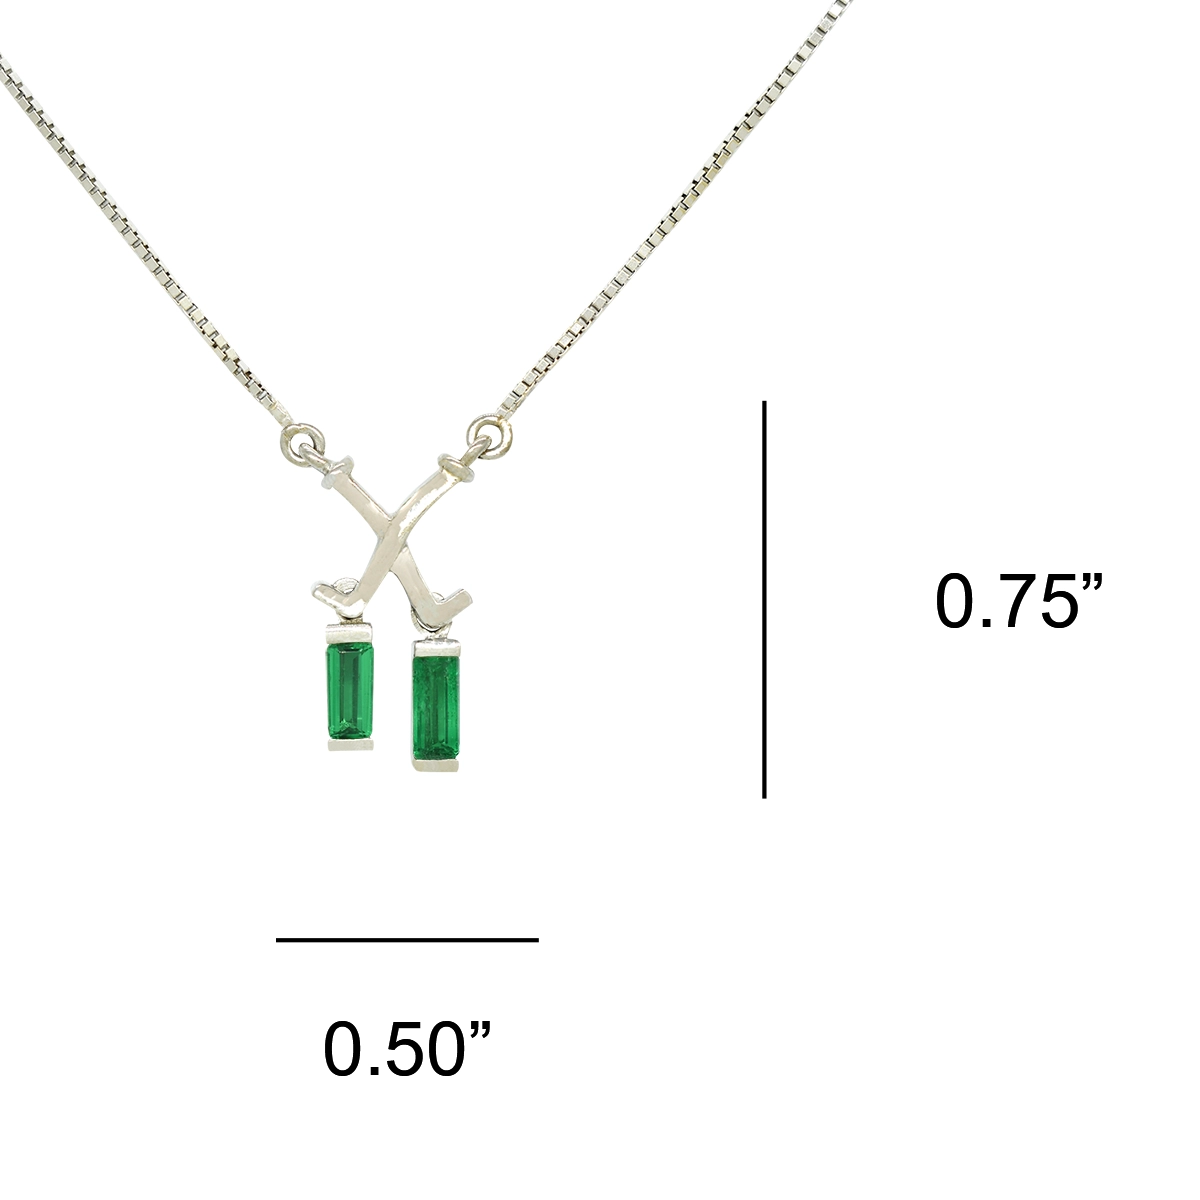 This emerald necklace has and 18 inches long stunning box chain with a durable lobster clasp. Its center part, where the baguette emeralds are set, is 3/4 of an inch (0.75 inches) high by 1/2 an inch (0.50 inches) wide